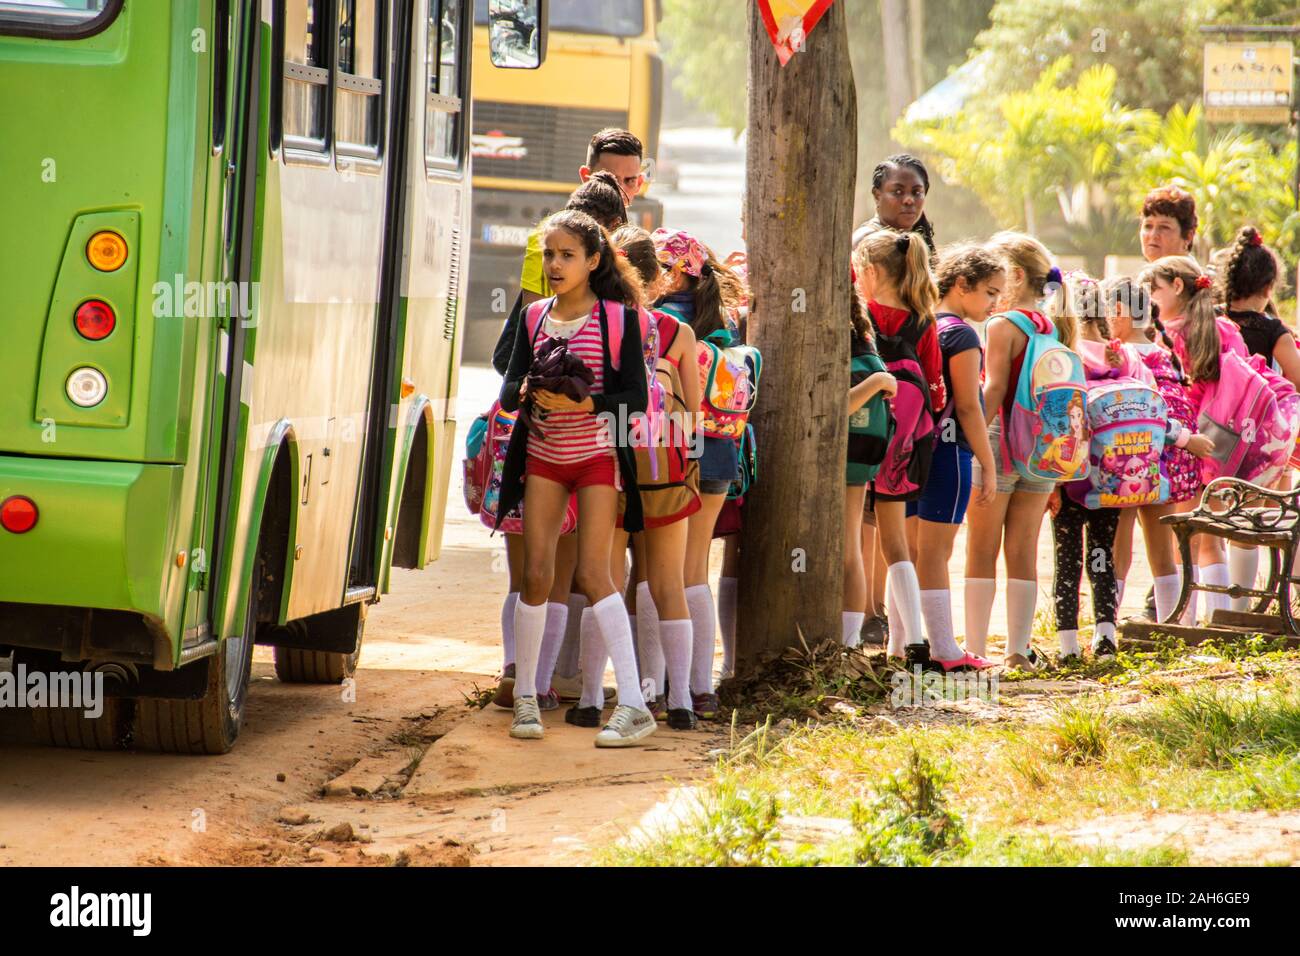 People of Havana Series - A busload of Junior High school students getting ready to board a bus. Stock Photo